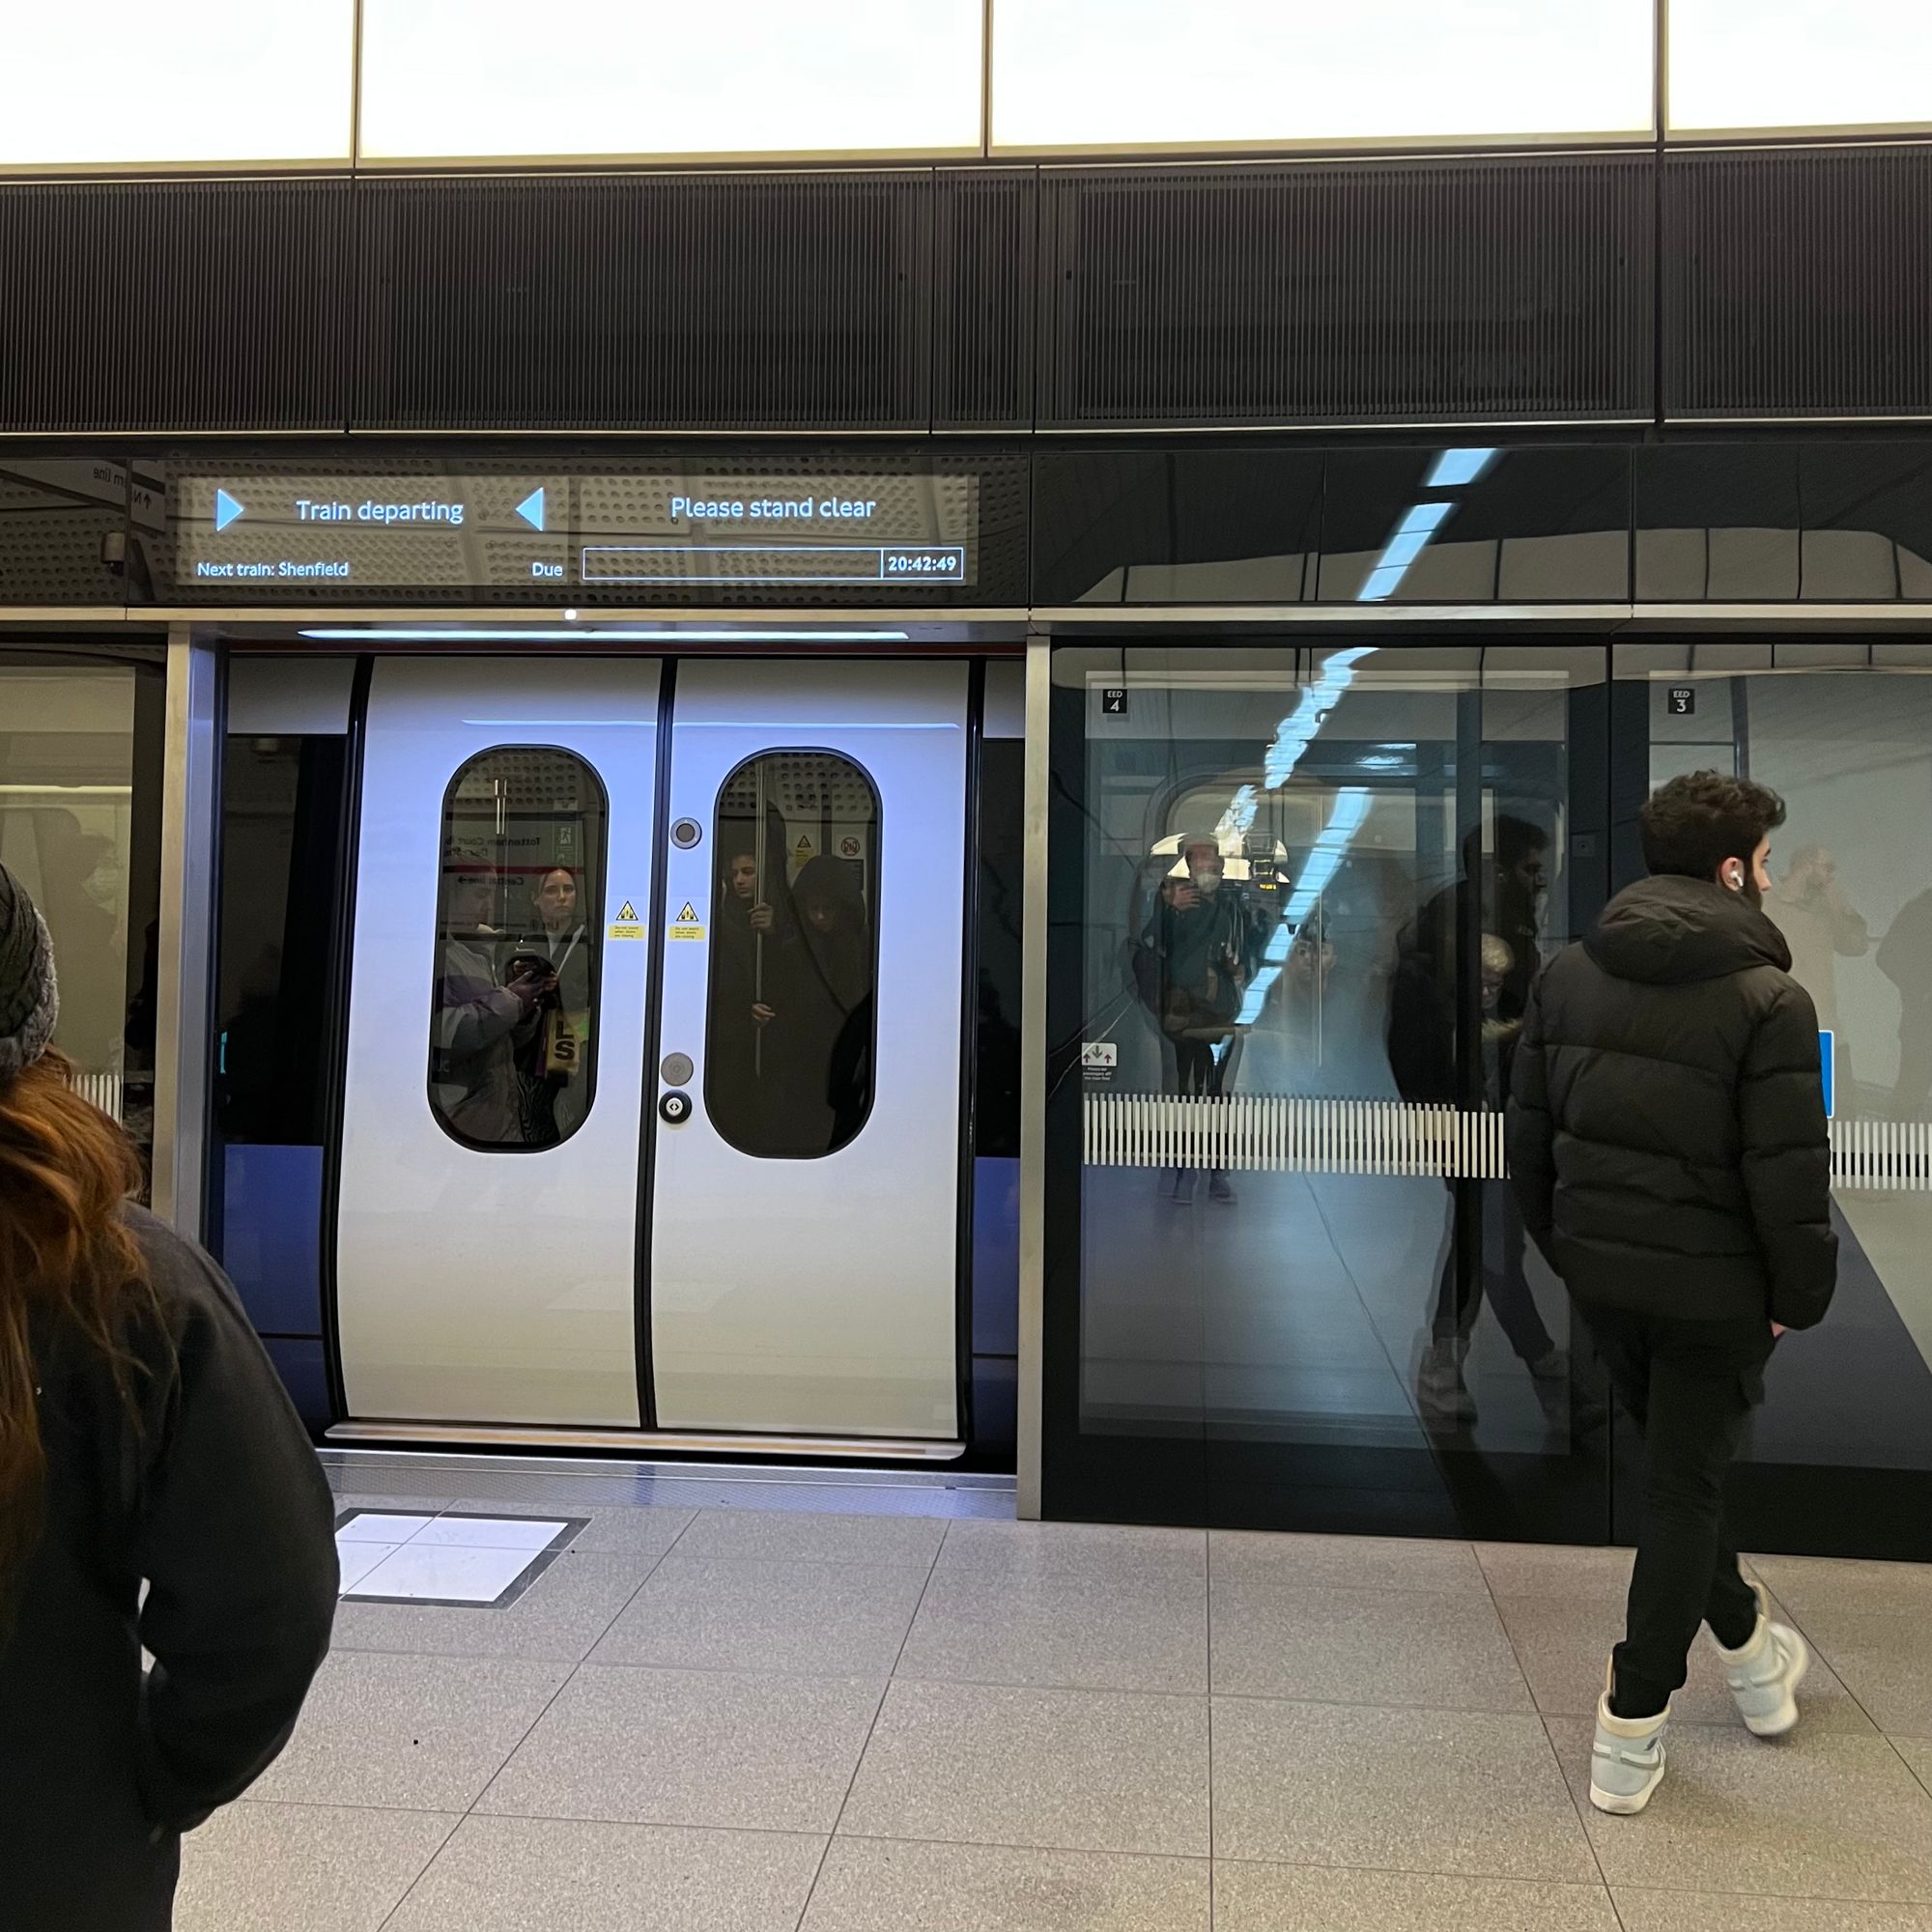 An Elizabeth line train stood at a platform with its doors closed, but the full-height platform edge doors still open. The screen displays "Train departing, please stand clear," but the train is not departing.